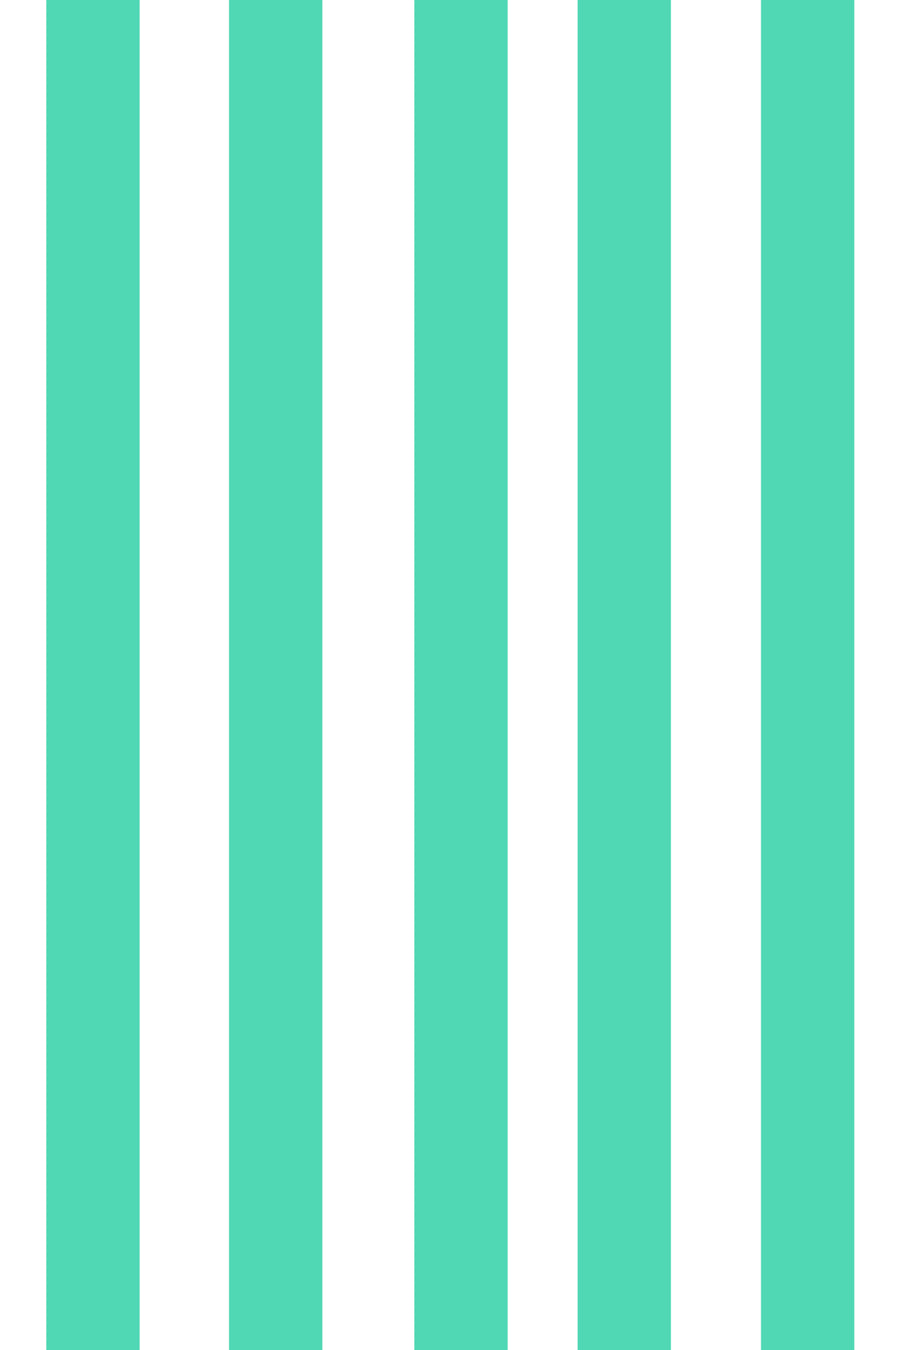 Woolf With Me Fitted Crib Sheet Stripes color_light-jade